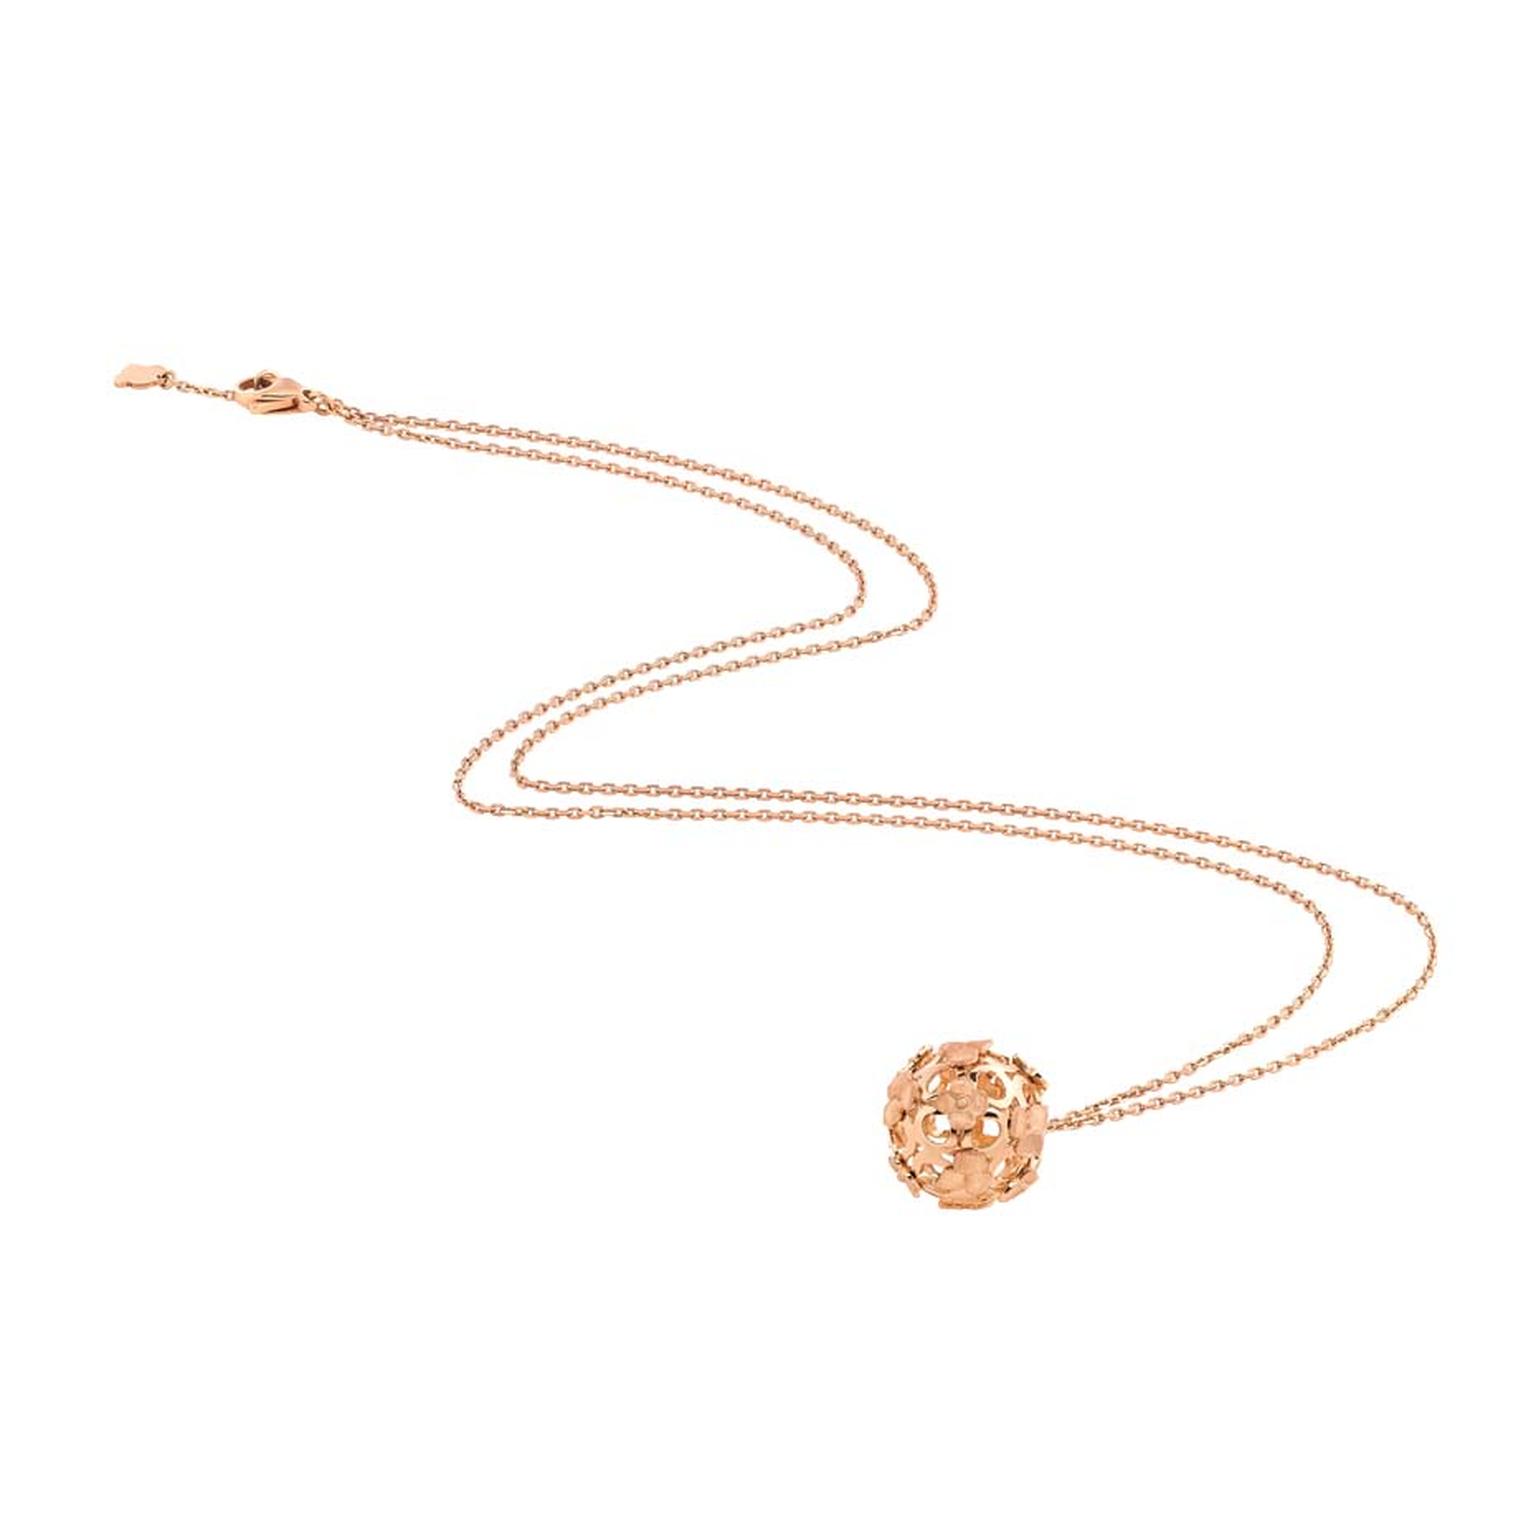 A delicate ball of interlaced rose gold hydrangea flowers hang from a long adjustable rose gold chain in this pretty Chaumet Hortensia pendant necklace.